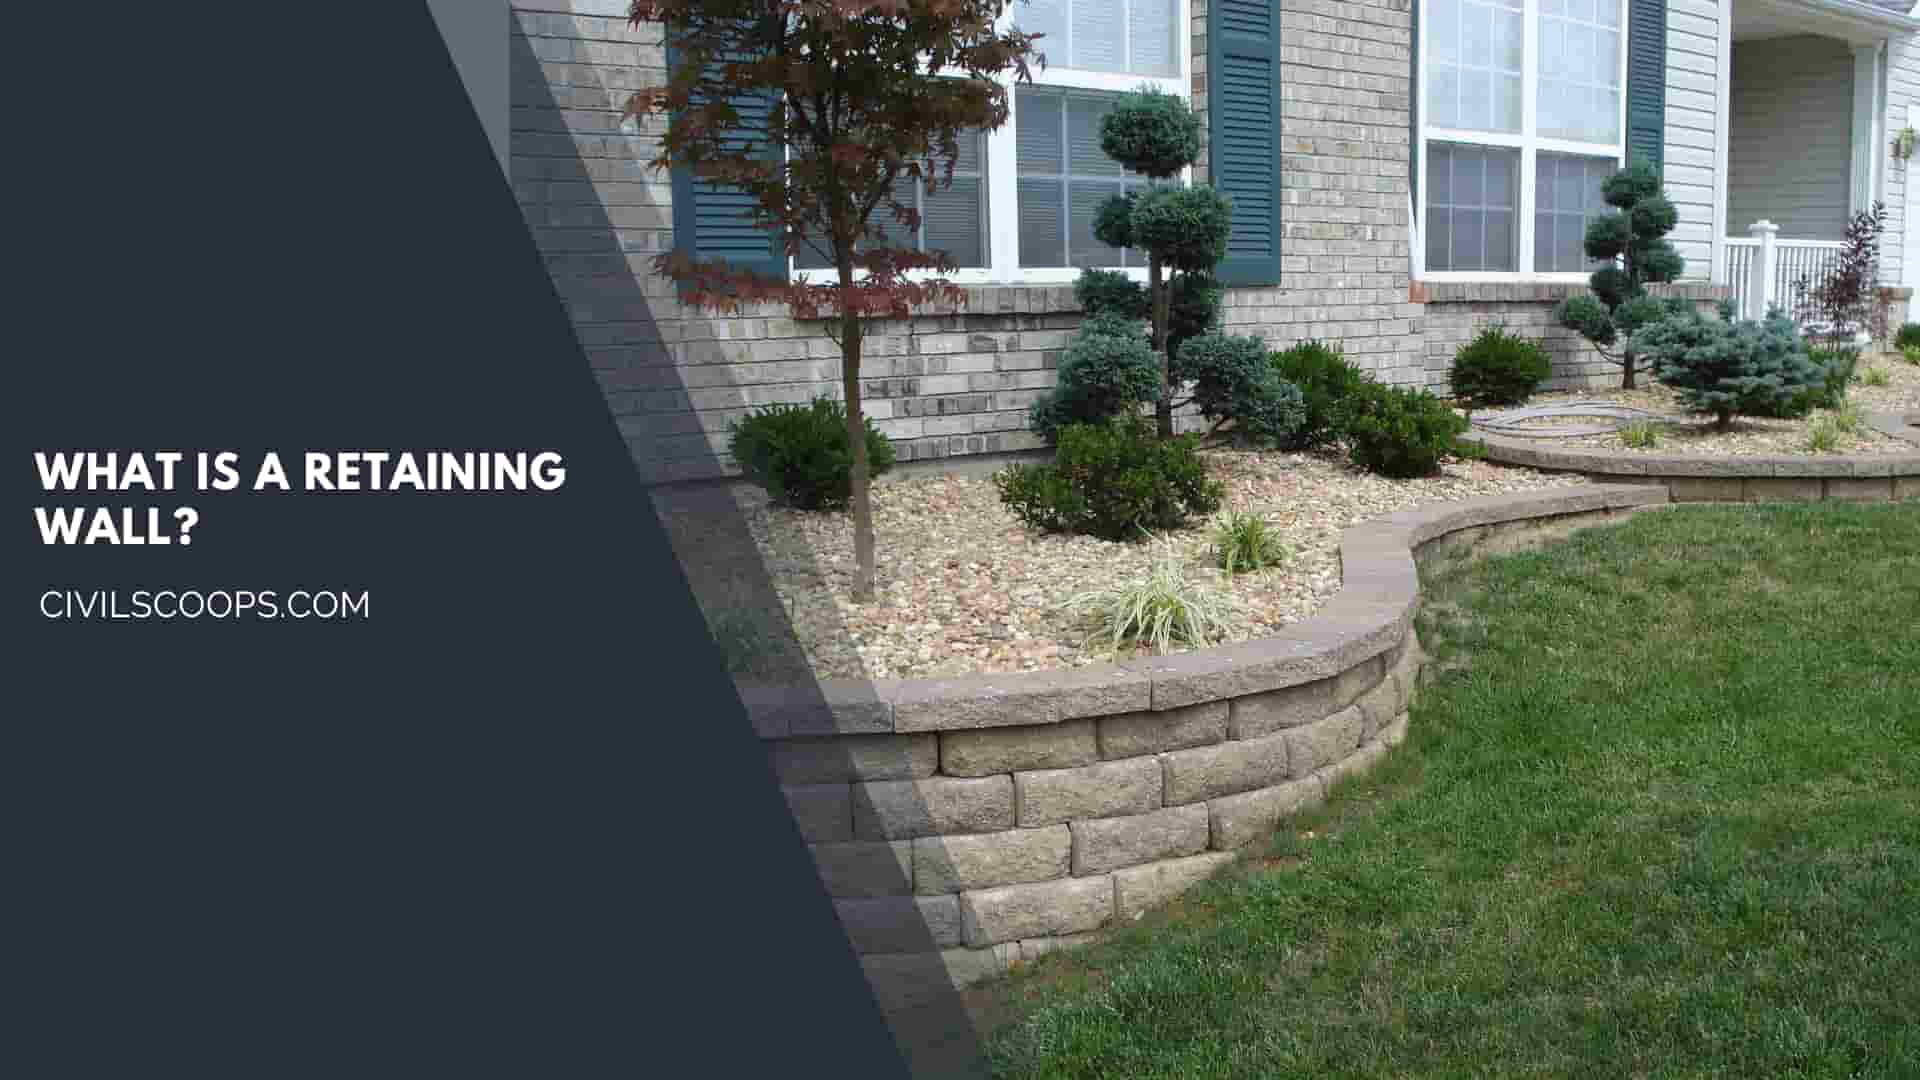 What Is a Retaining Wall